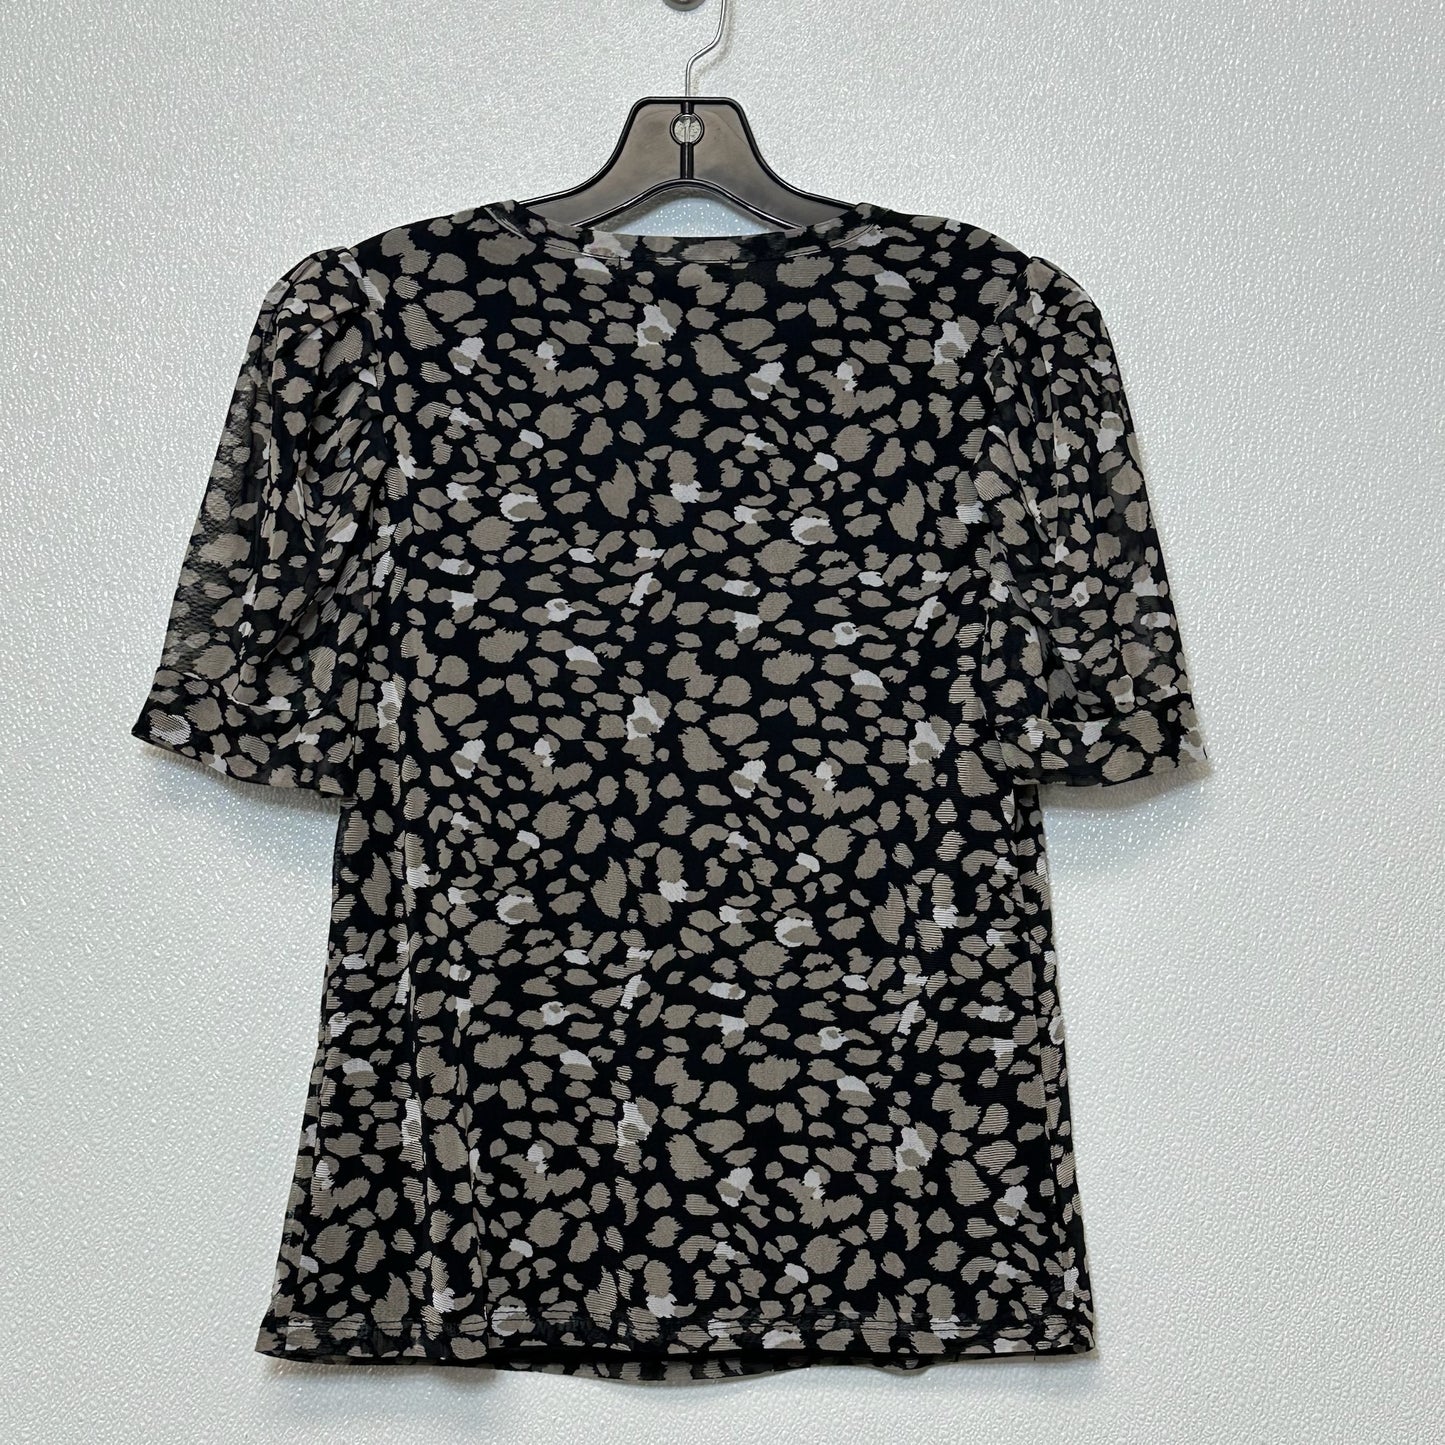 Top Short Sleeve By Clothes Mentor  Size: Petite   Small